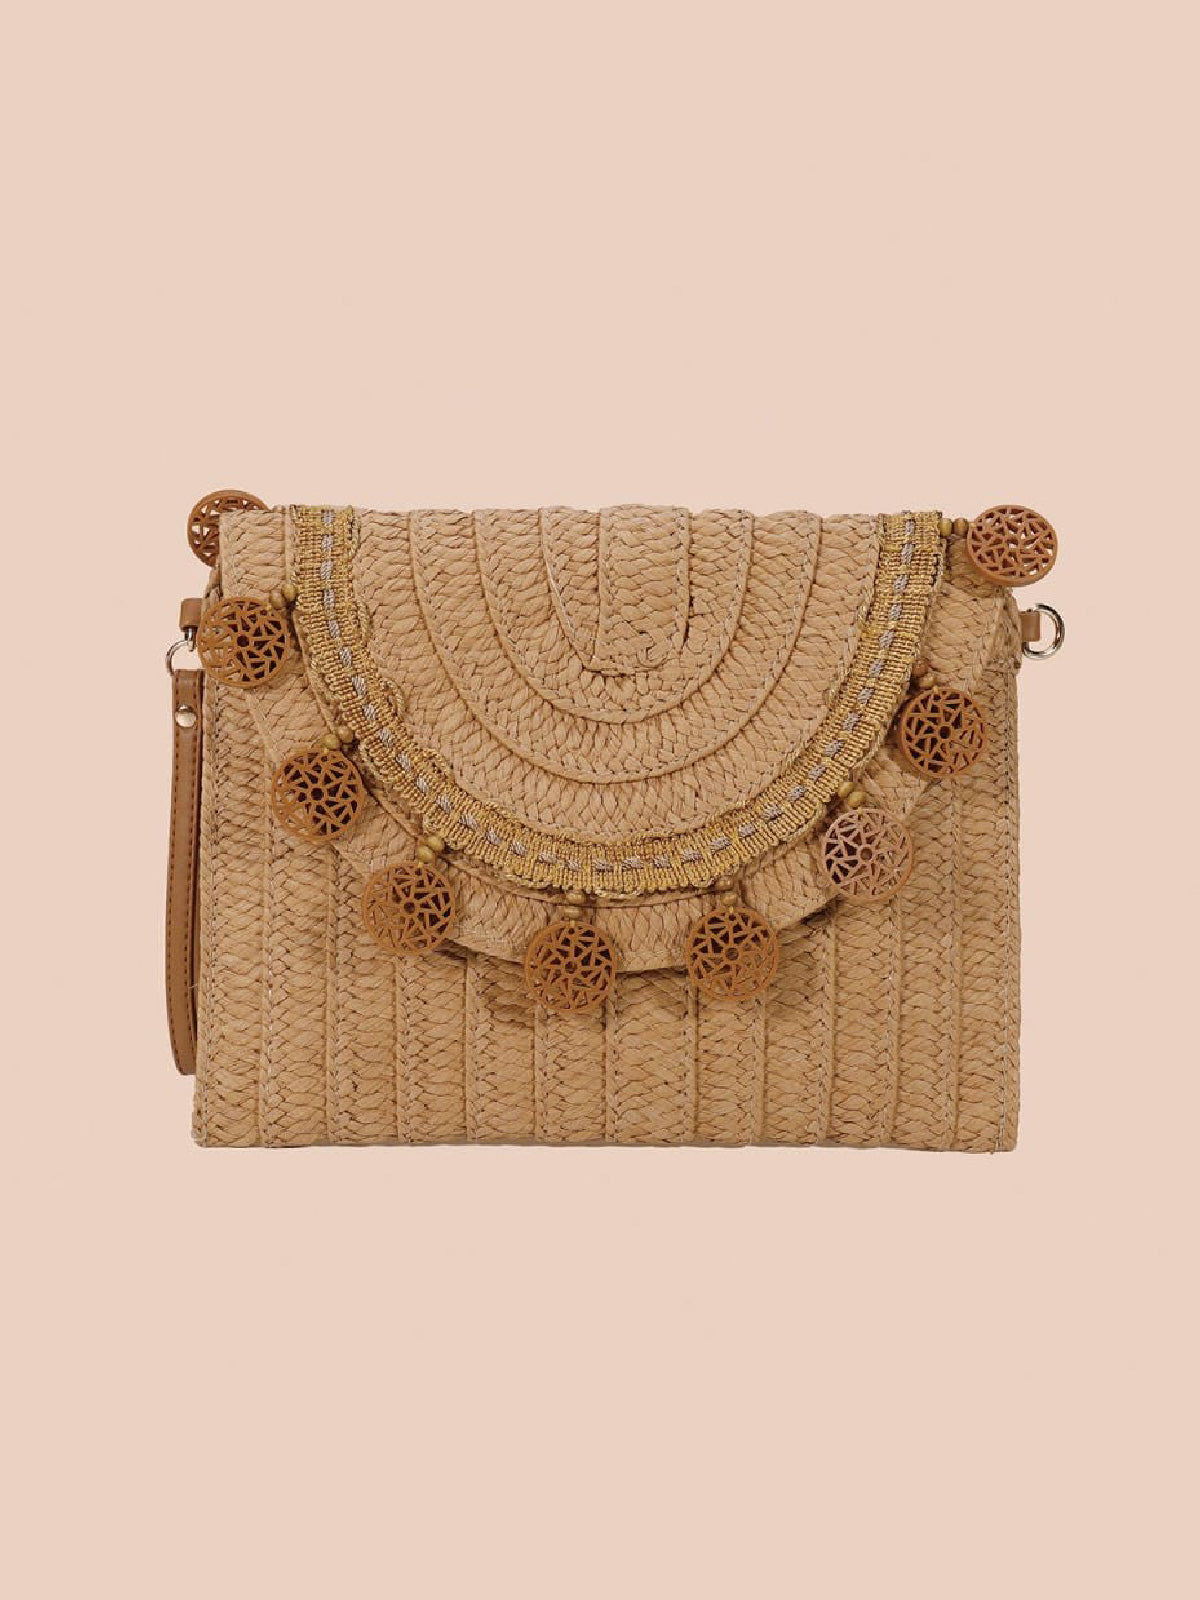 Vintage wicker fringe bag adorned with distinct brown rings, showcasing a blend of traditional craftsmanship and elegant design. Dual straps allow for versatile wear, merging the charm of bygone eras with contemporary functionality